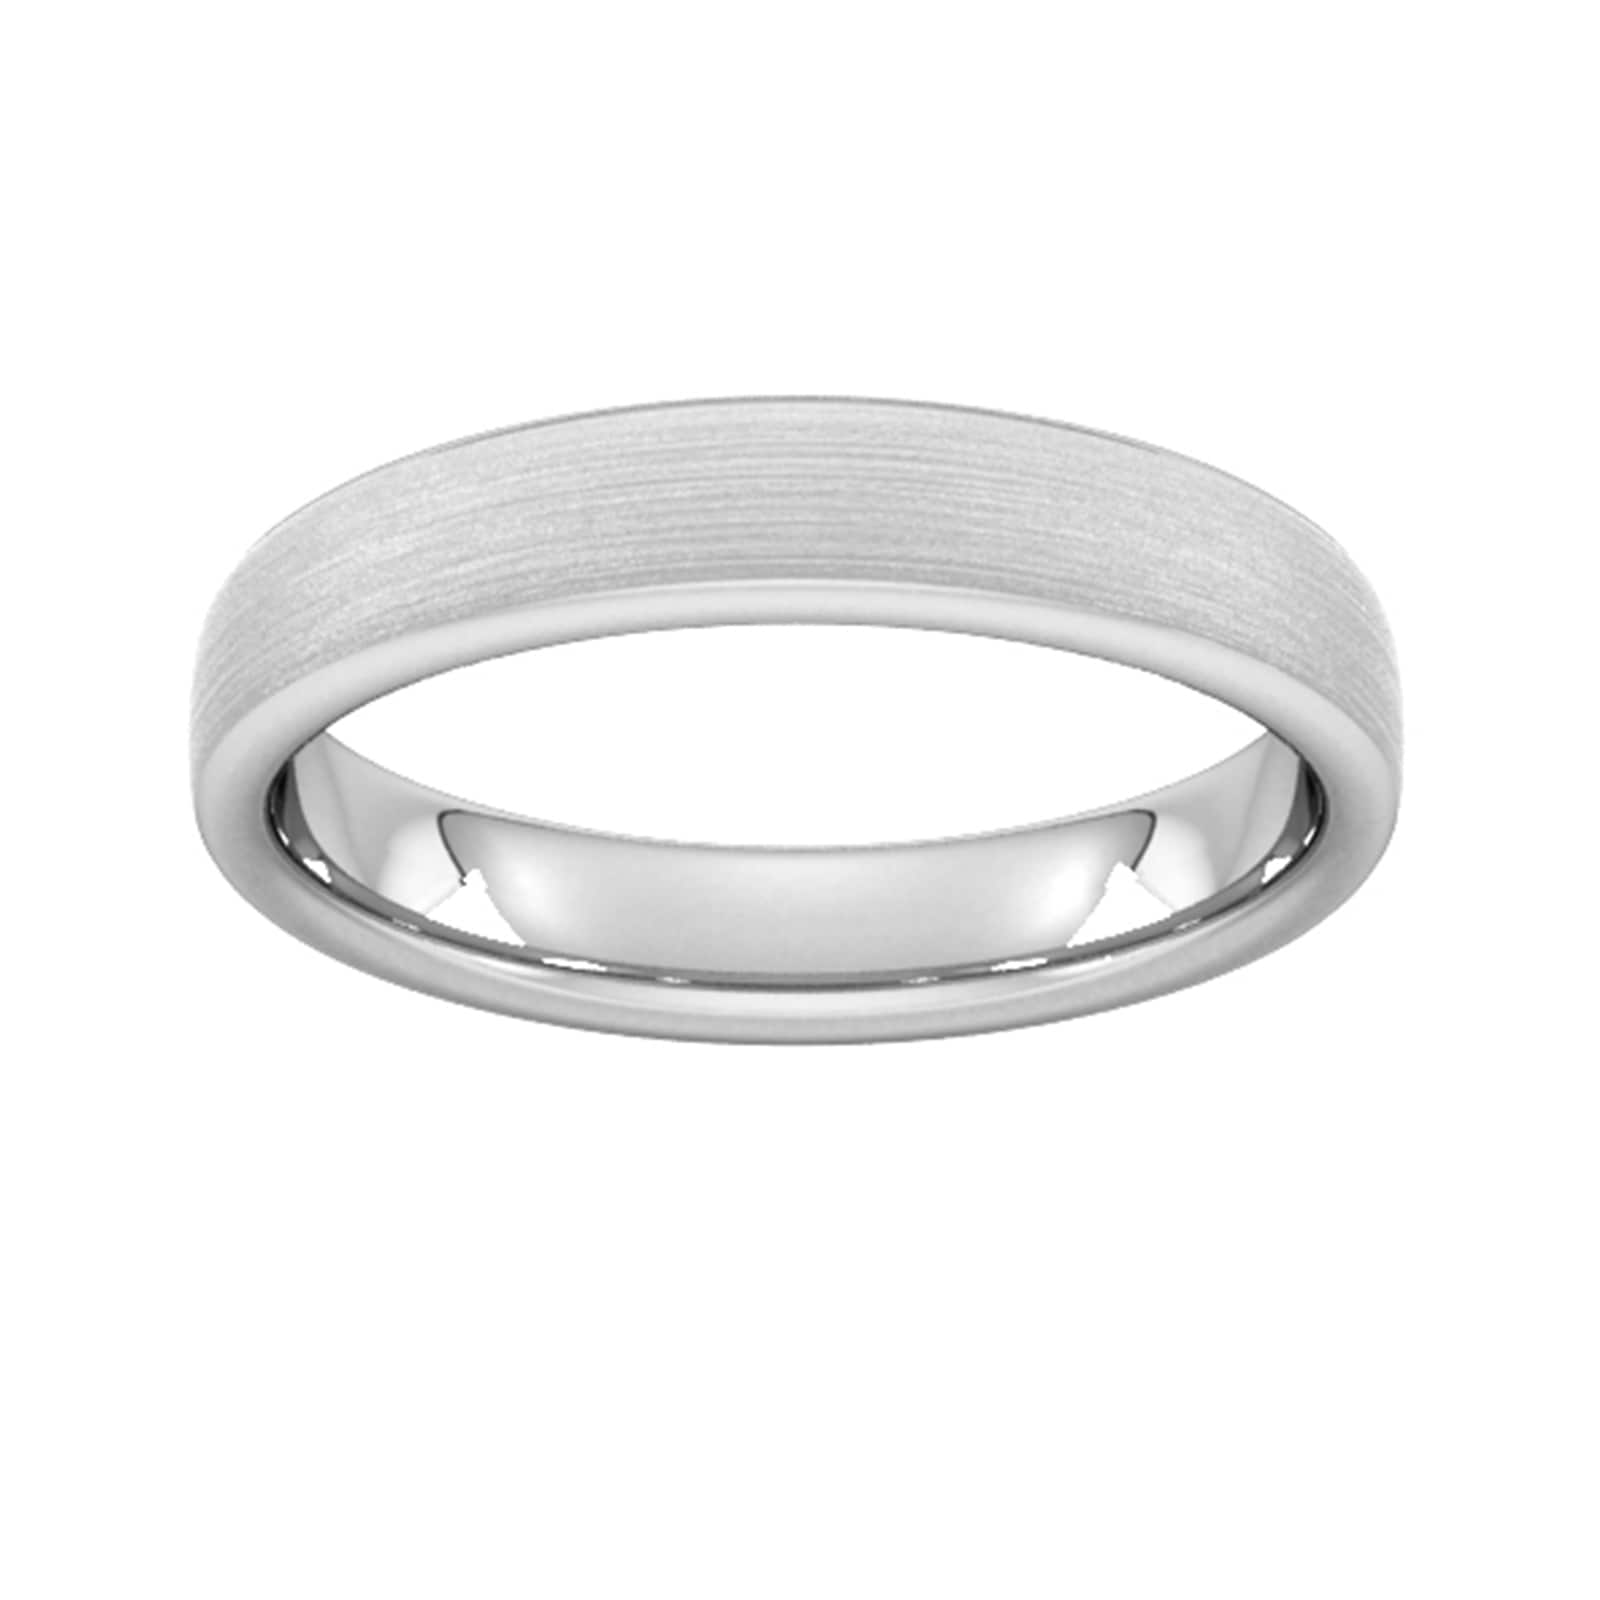 4mm Traditional Court Standard Matt Finished Wedding Ring In 18 Carat White Gold - Ring Size W